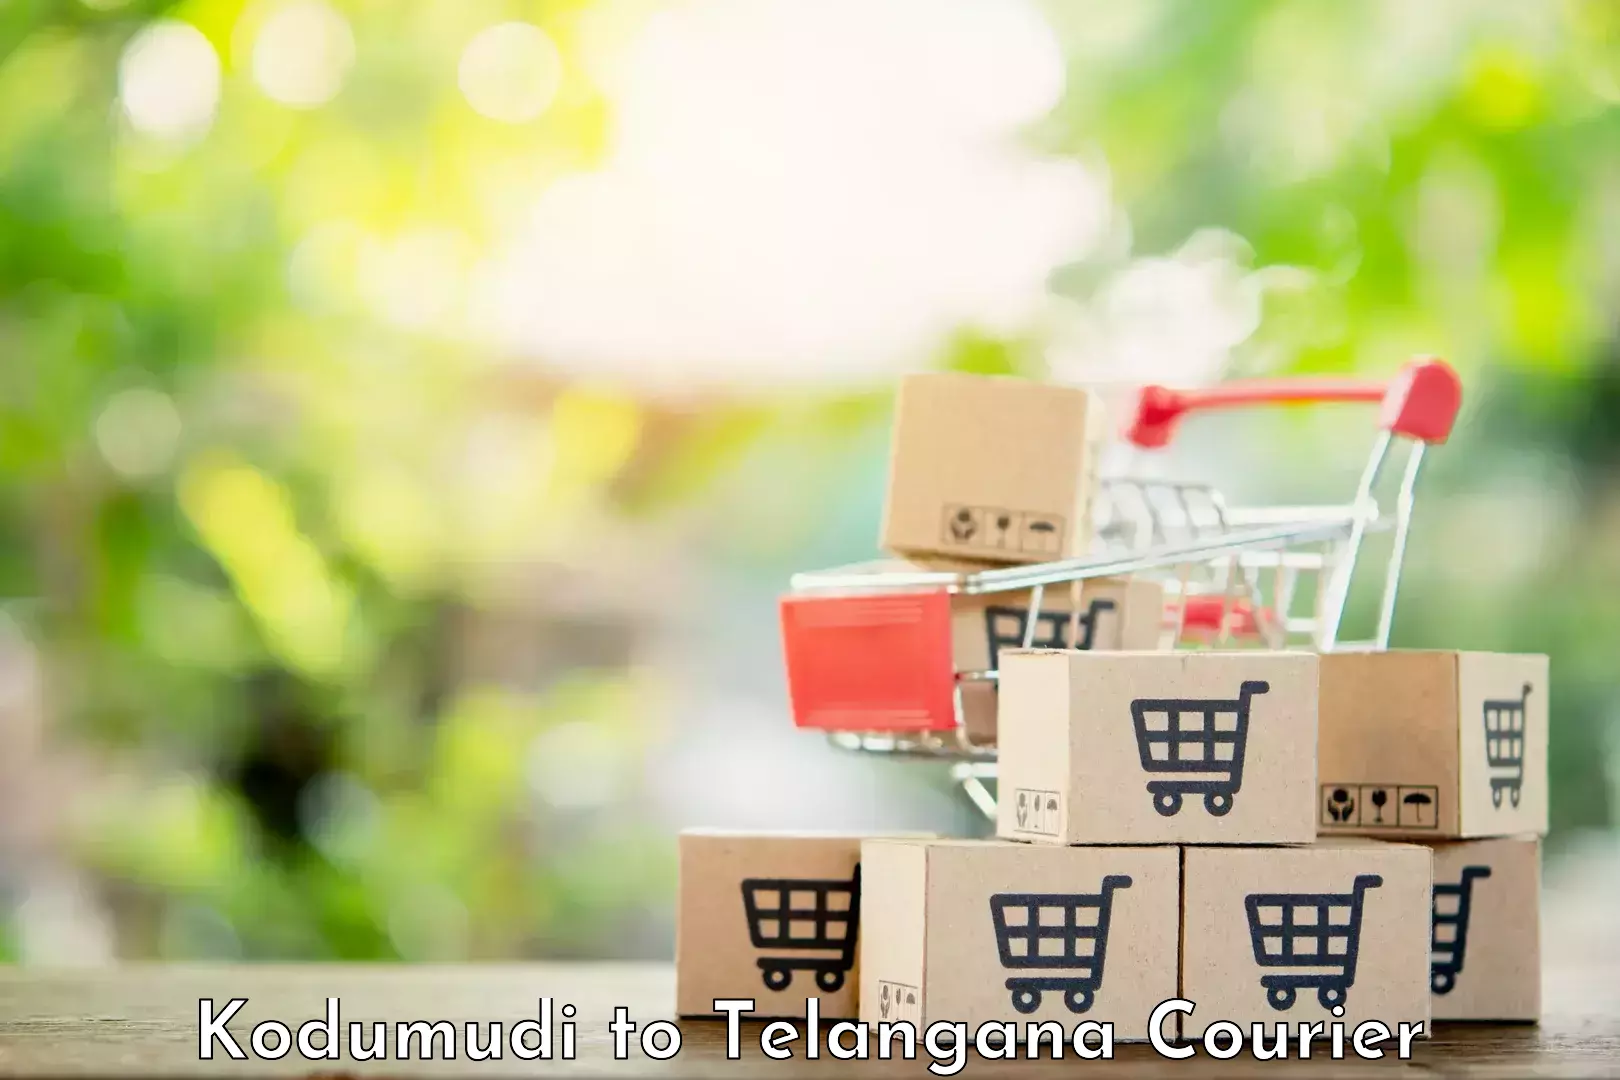 On-demand shipping options Kodumudi to Trimulgherry